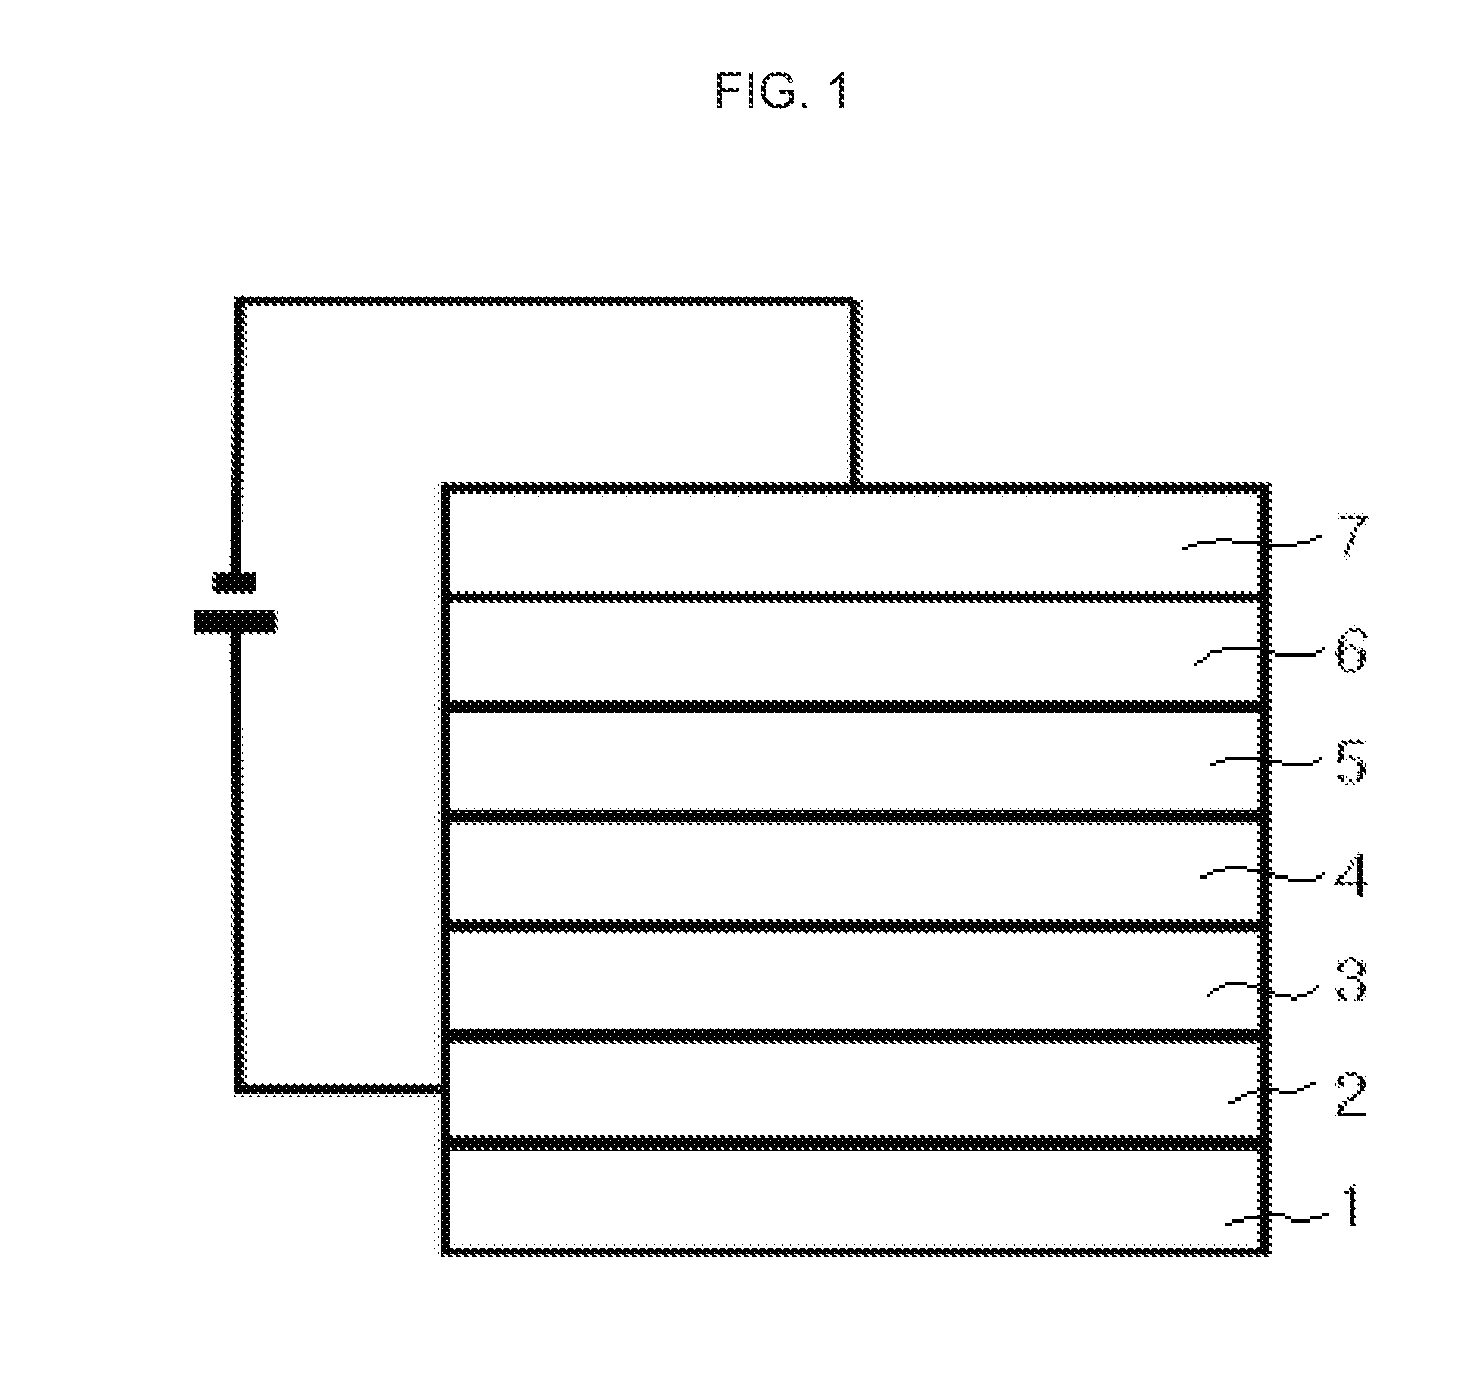 Asymmetrical Aryl Amine Derivative for Organic Electroluminescence Devices, Method for Preparing Same, Organic  Thin Film for Organic Electroluminescence Devices and Organic Electroluminescence Device Using Same